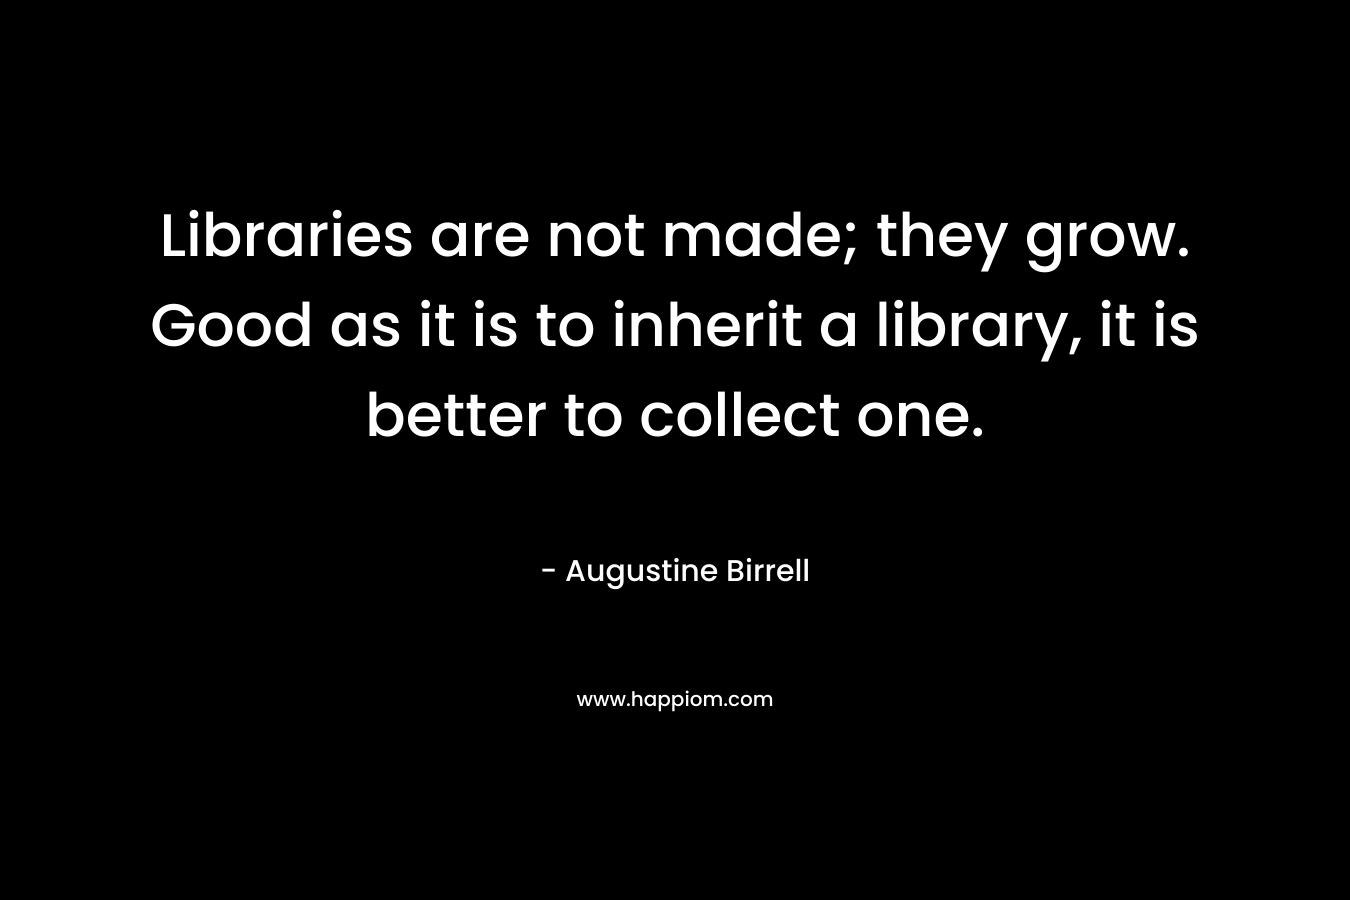 Libraries are not made; they grow. Good as it is to inherit a library, it is better to collect one.